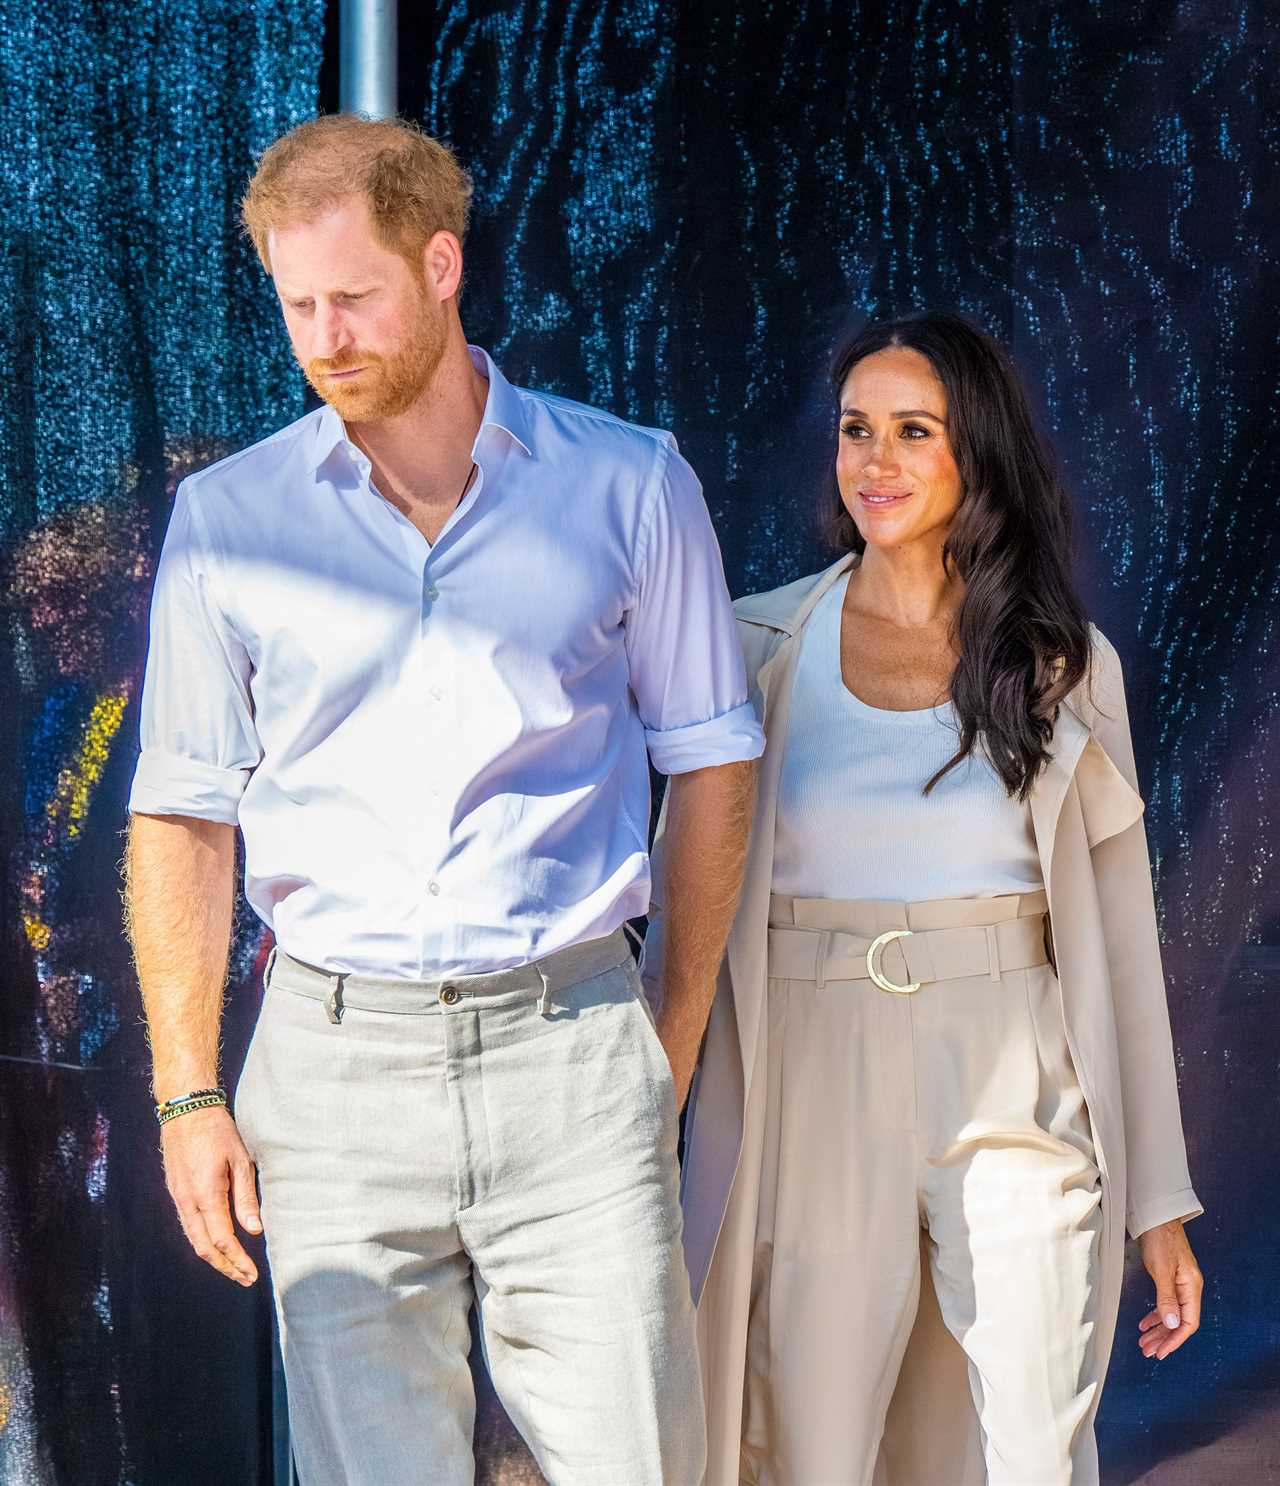 Expert claims Prince Harry will return to the UK without Meghan Markle